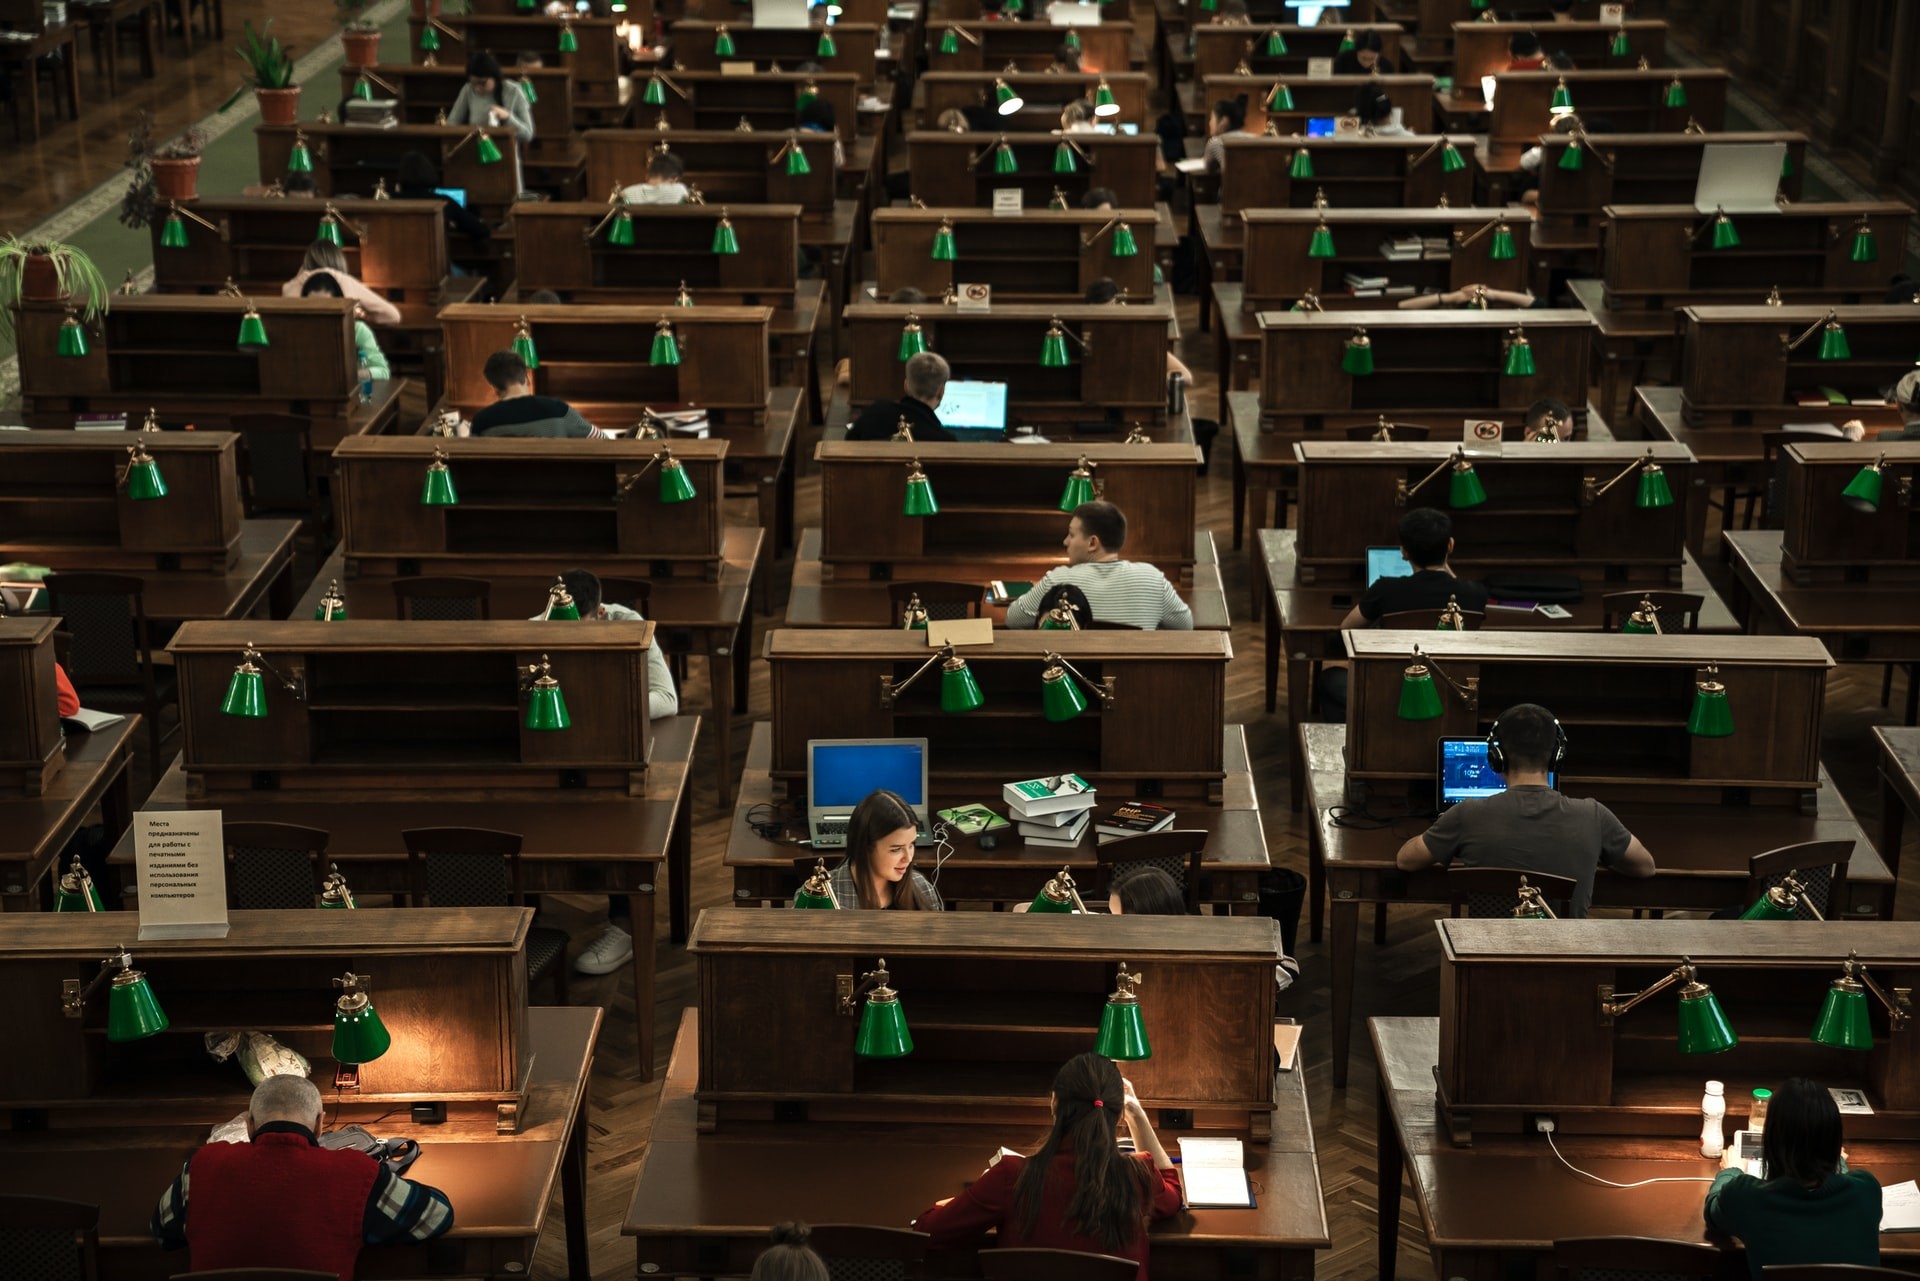 Overhead shot of students studying in a large college library.